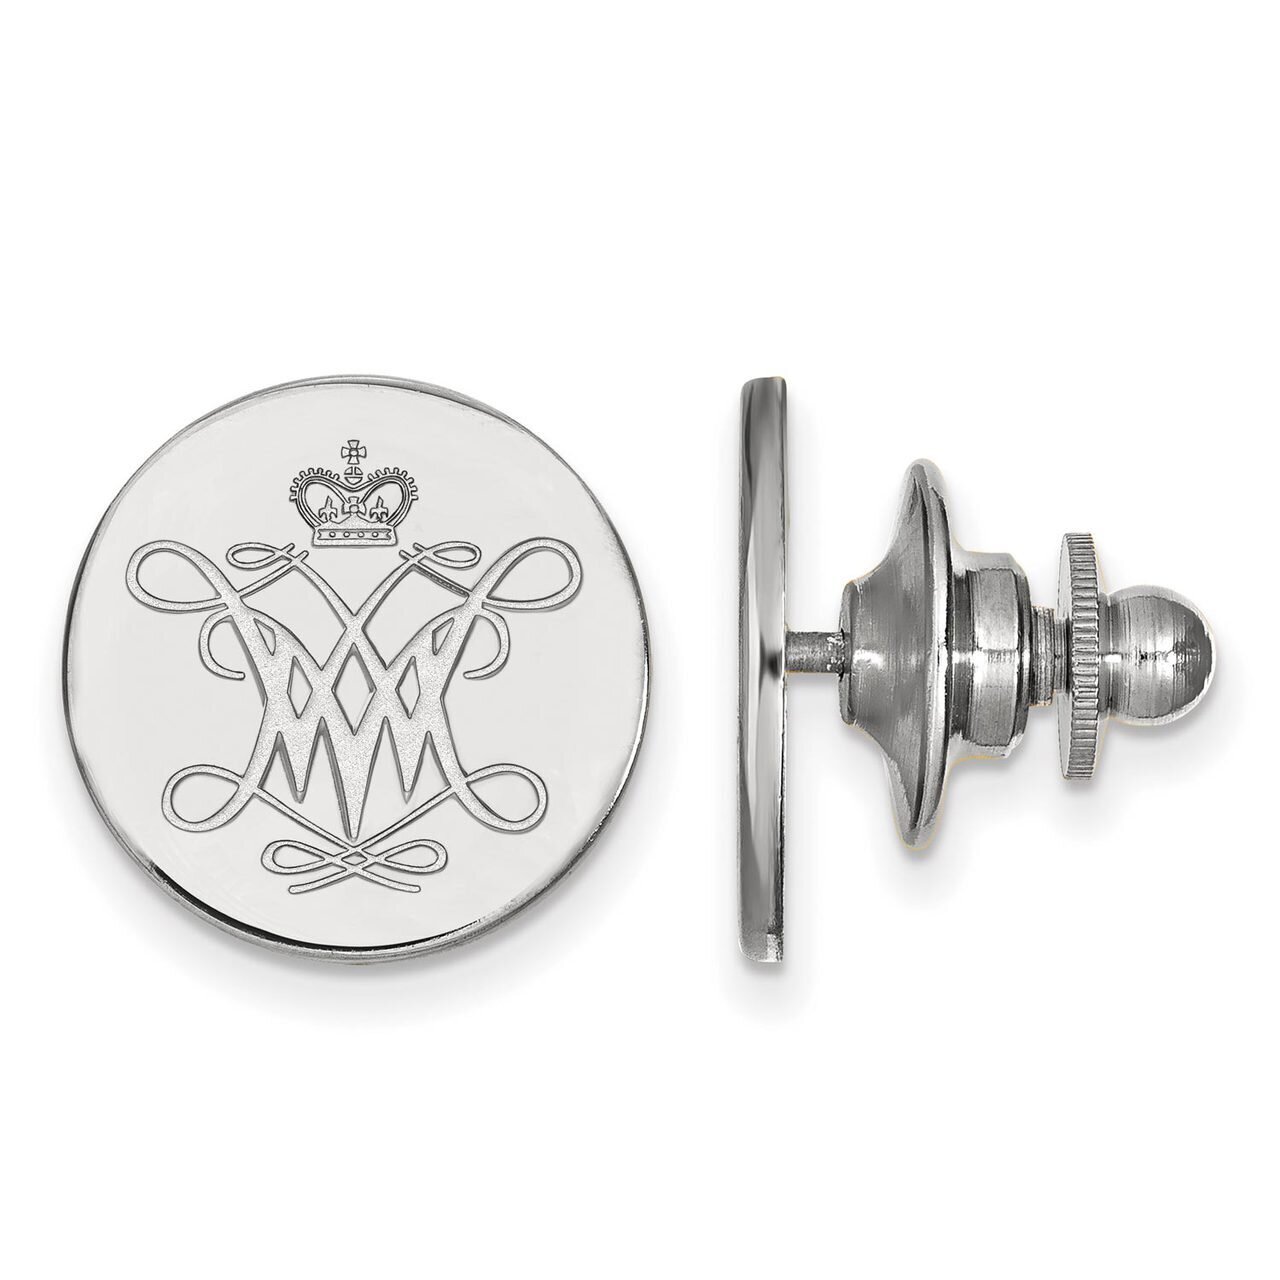 William And Mary Lapel Pin Sterling Silver SS001WMA